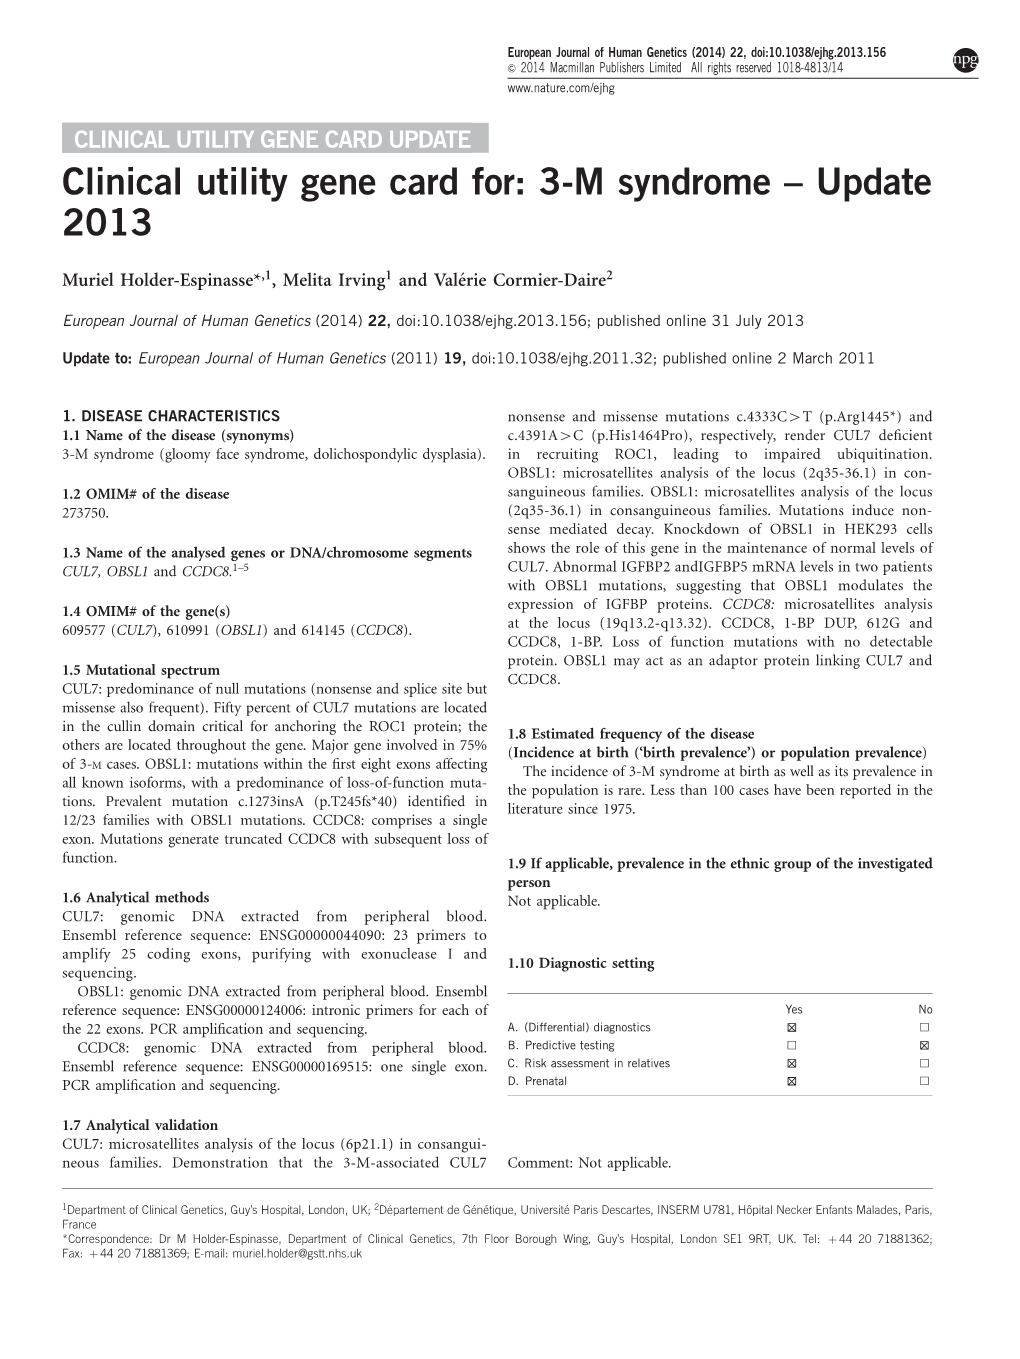 Clinical Utility Gene Card For: 3-M Syndrome – Update 2013